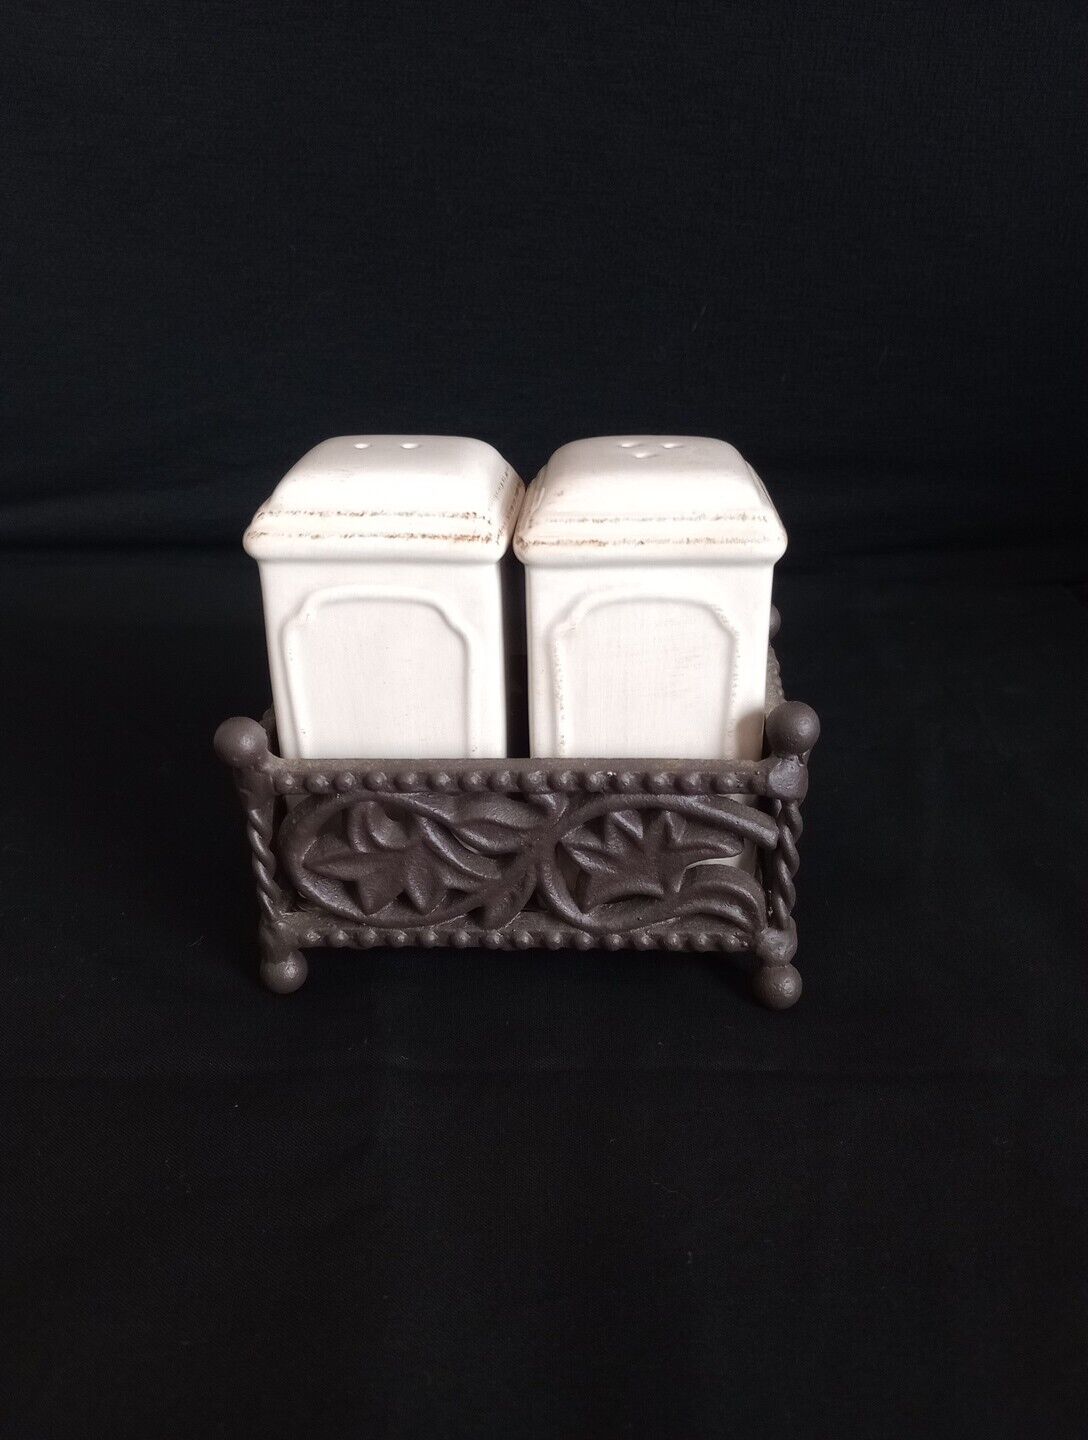 Beige Ceramic Salt &Pepper Shakers Acanthus Leaf Styled Cast Iron Metal Caddy